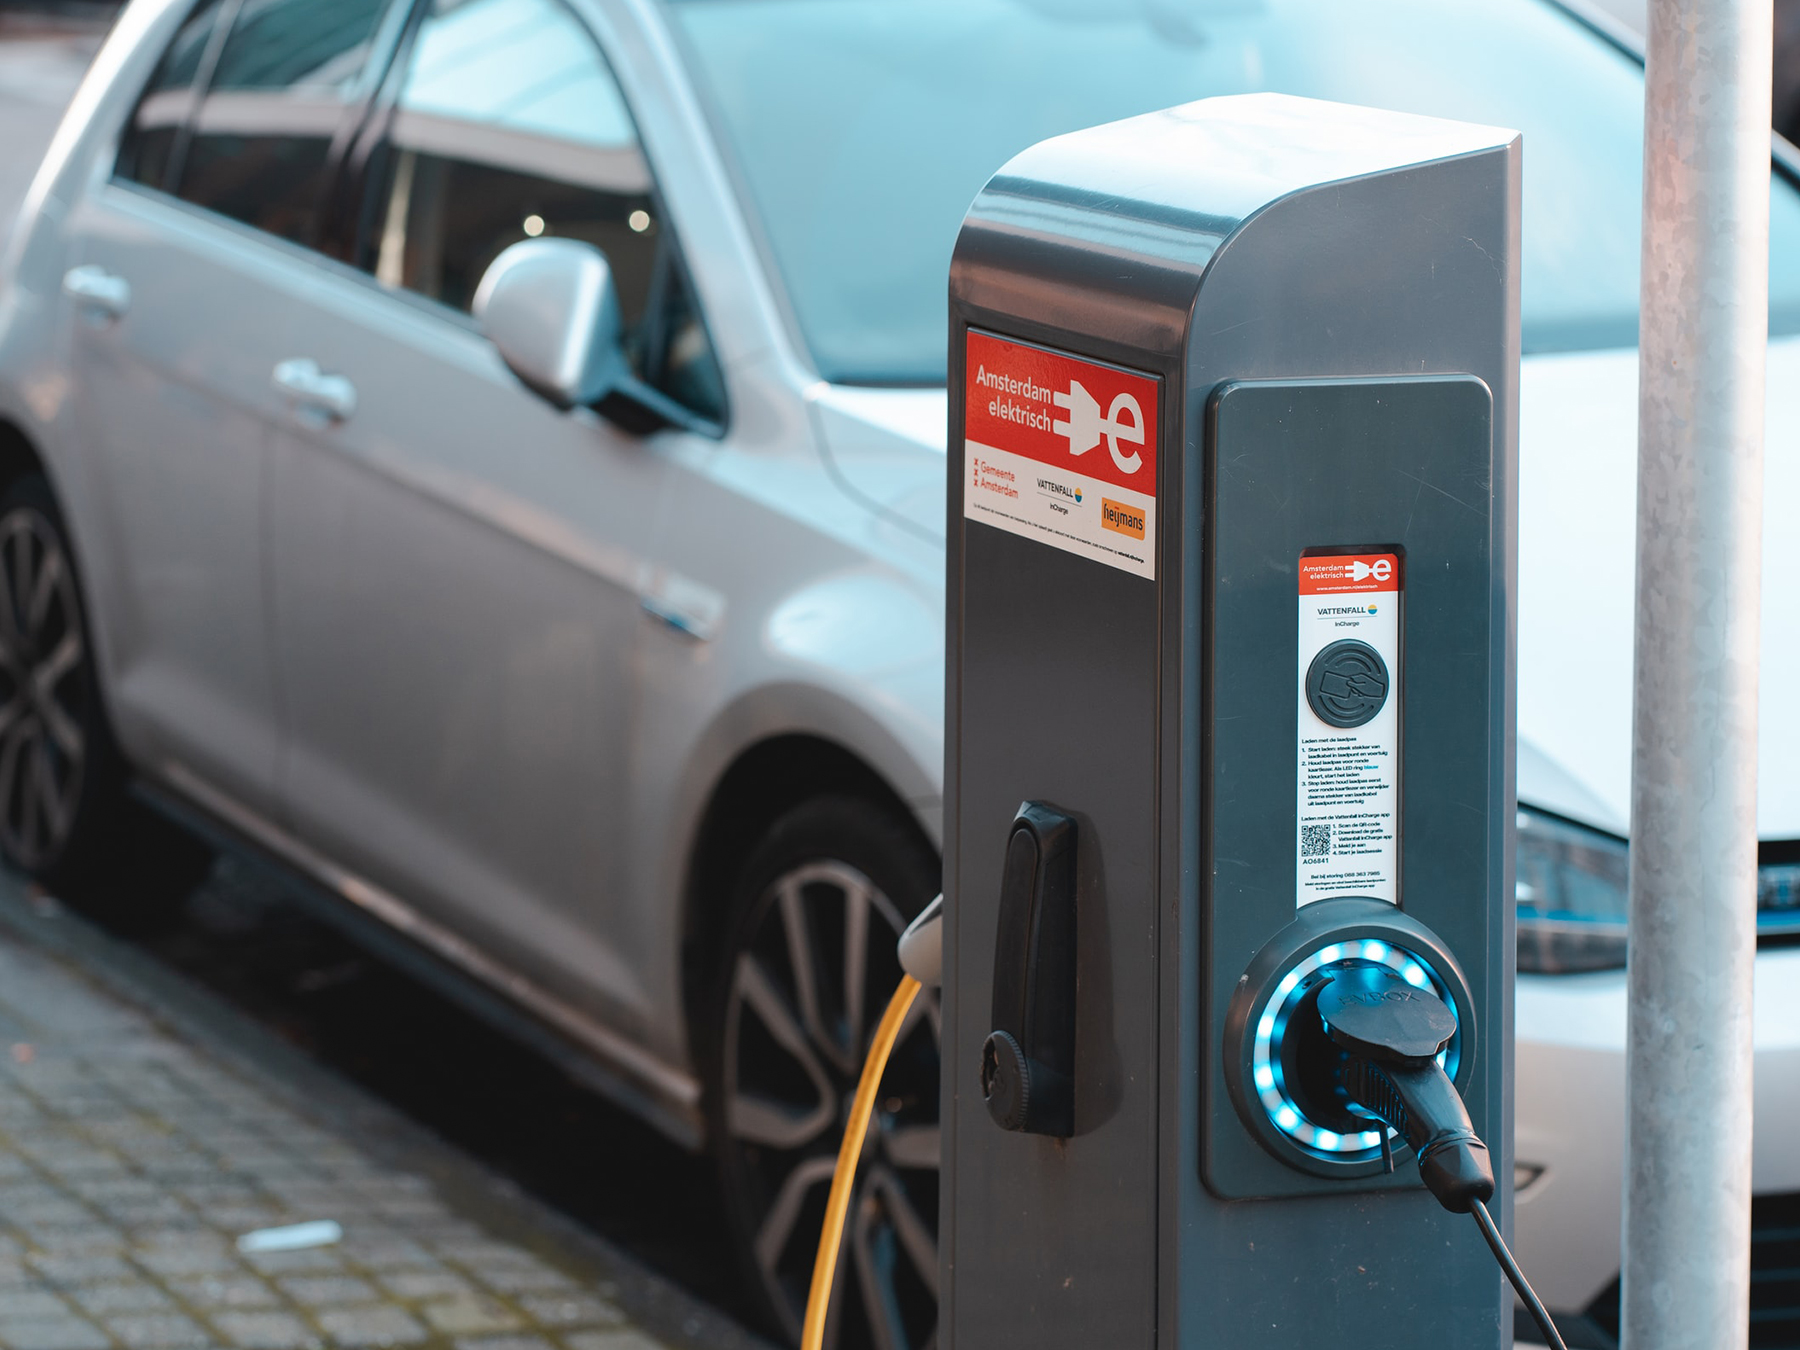 Pop-up charge points solve urban electric car problems